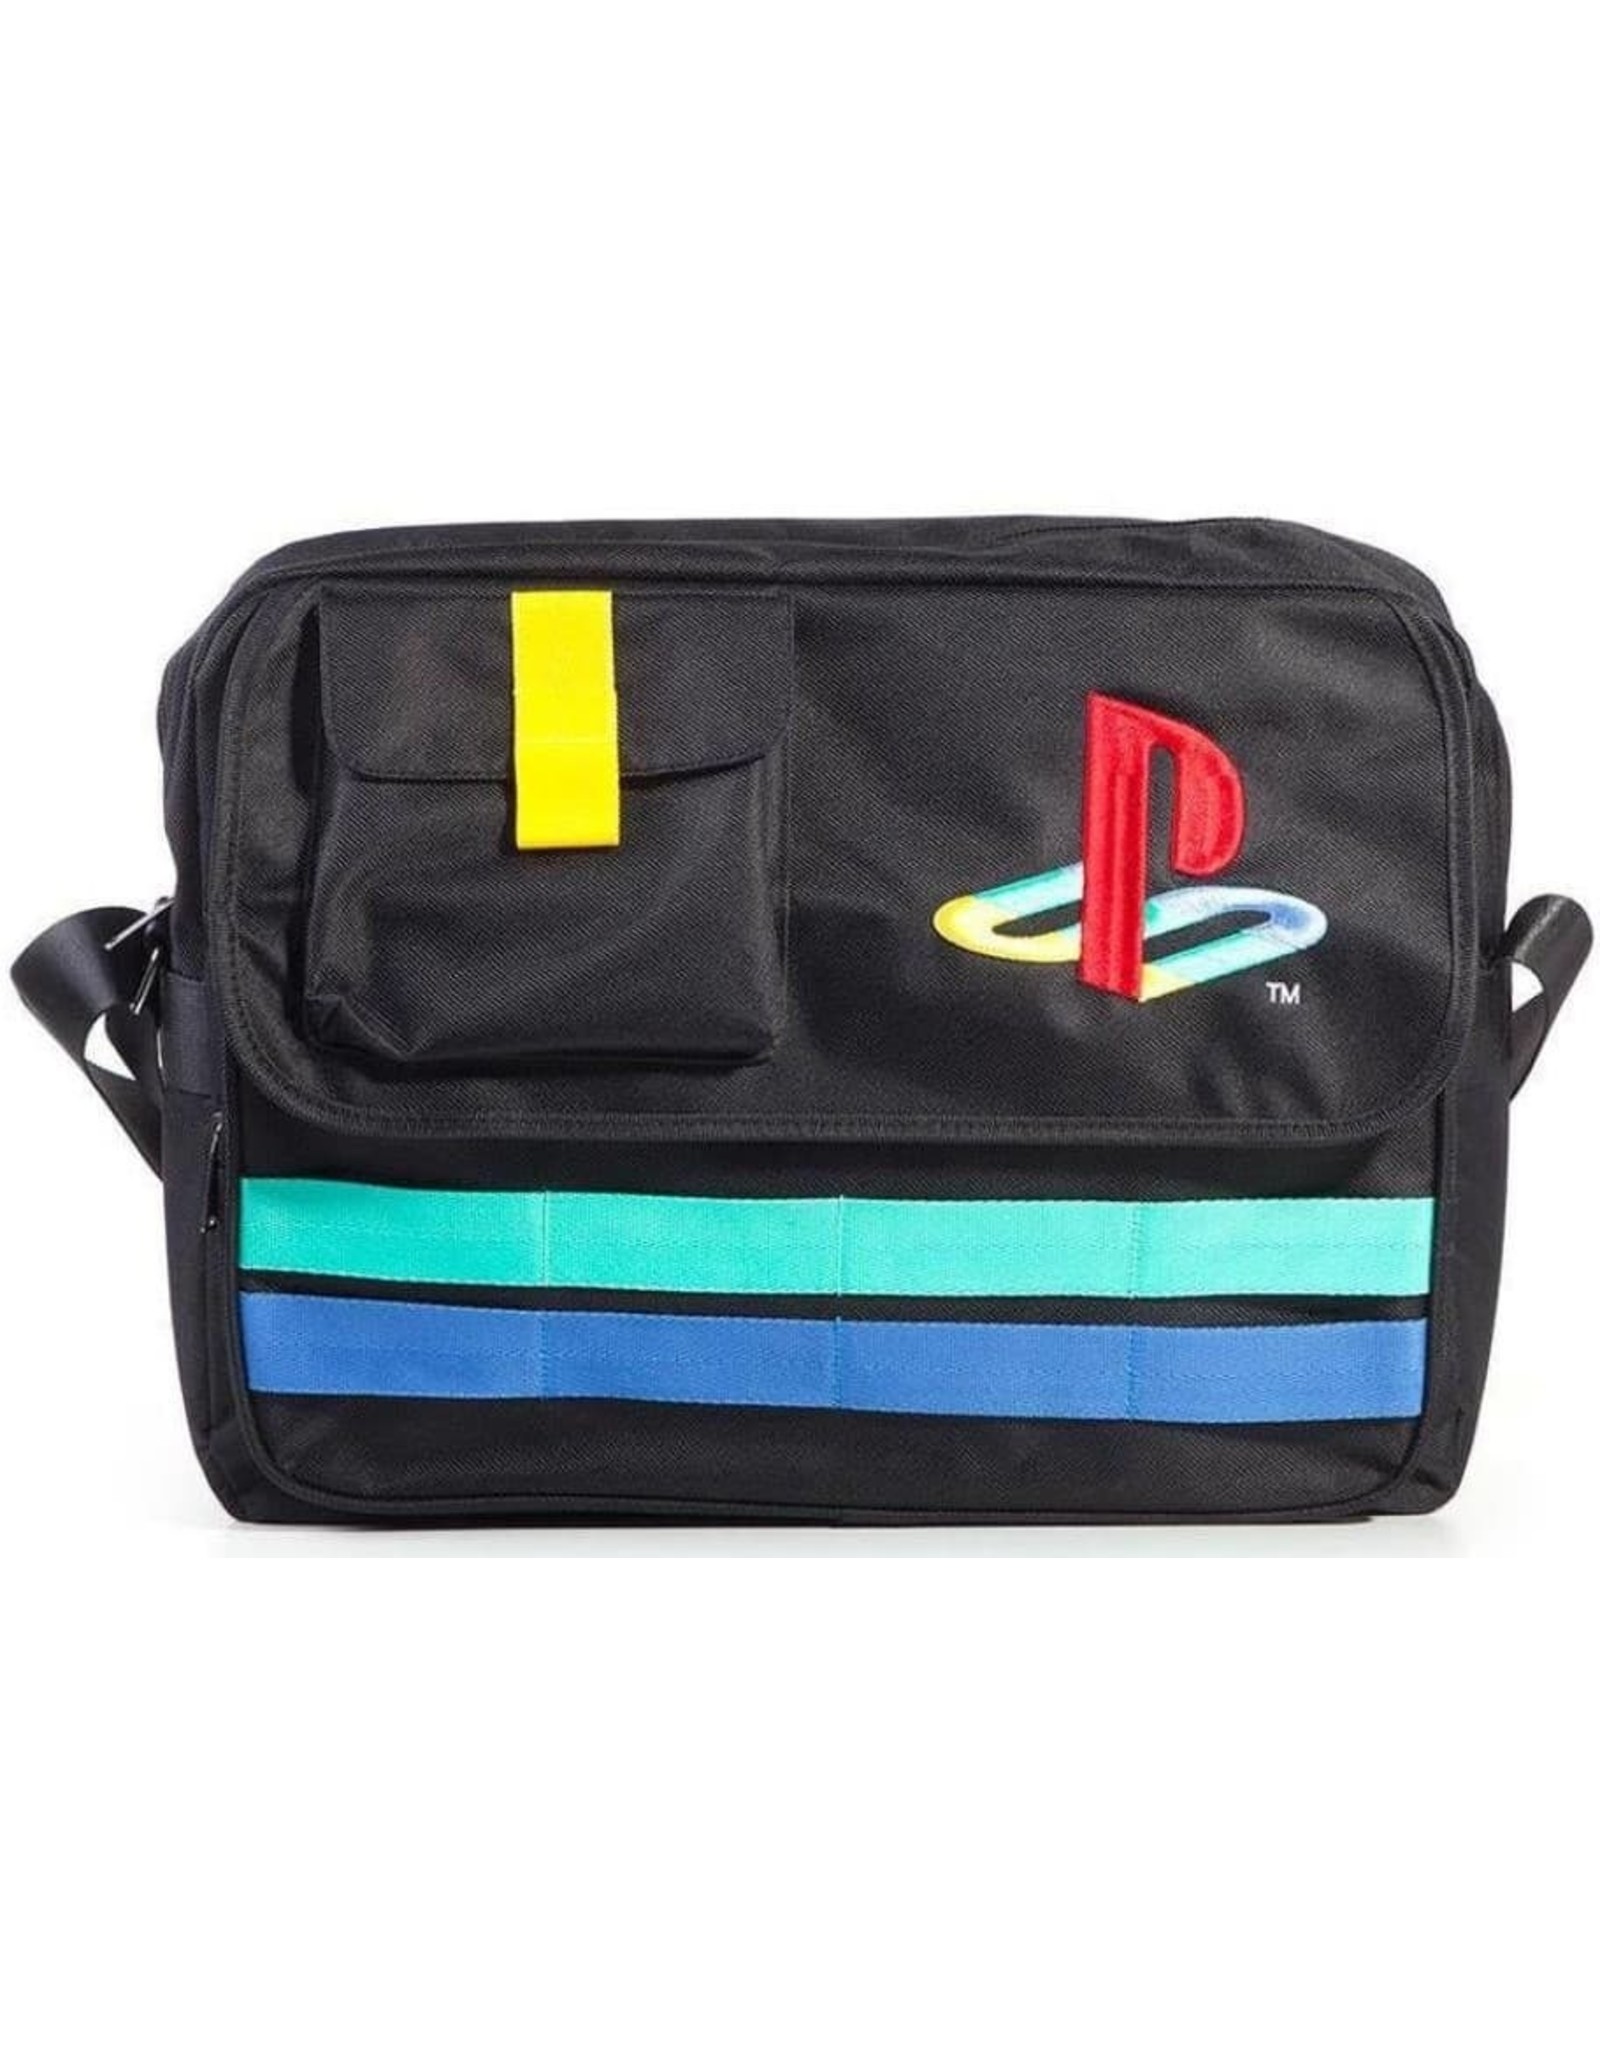 Playstation Merchandise bags - Playstation messenger bag with embroidered logo